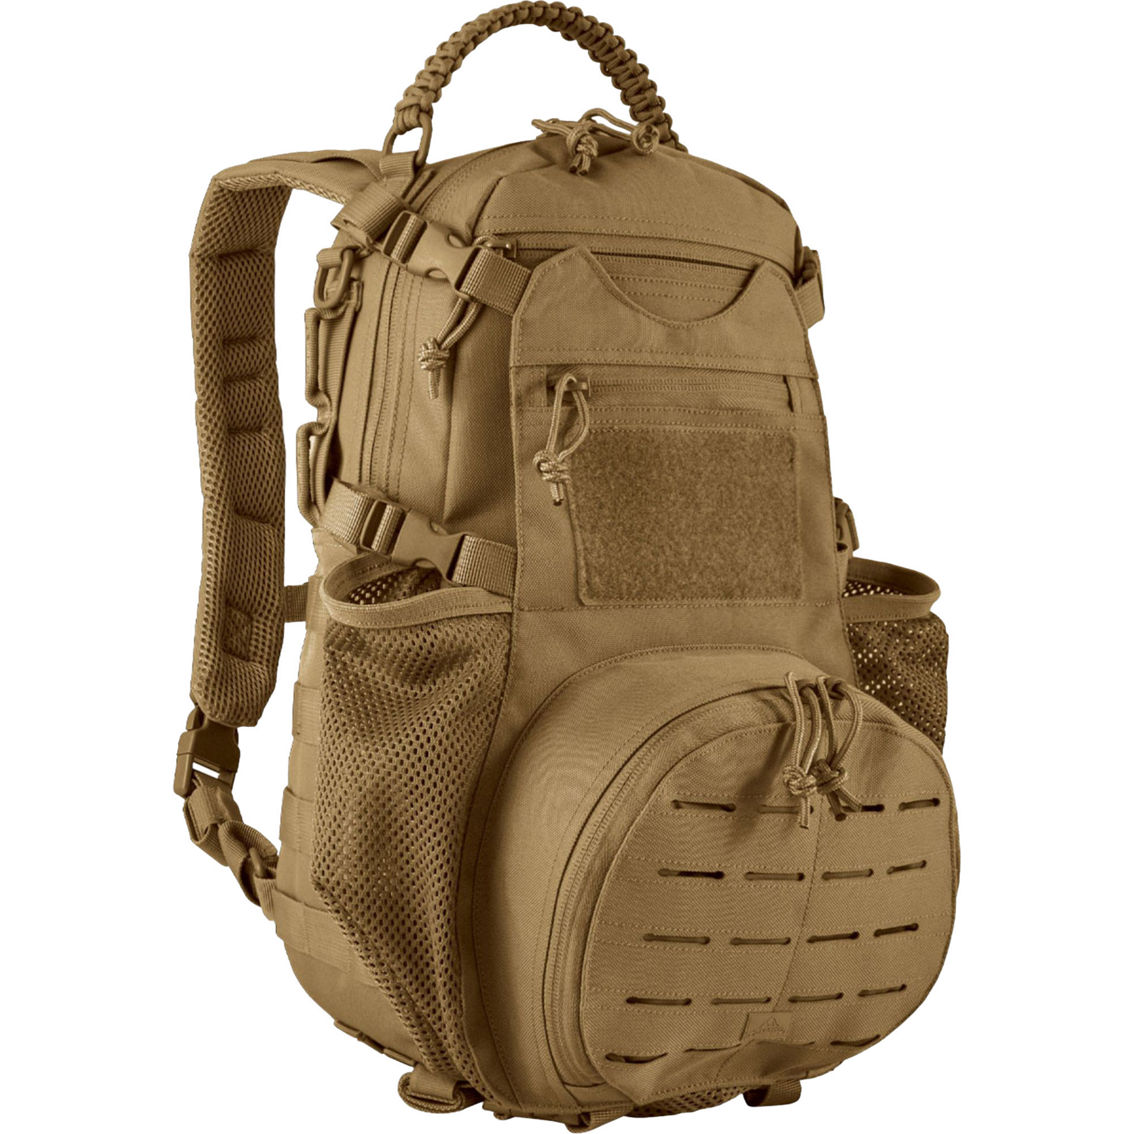 Red Rock Outdoor Gear Ambush Pack - Image 3 of 8